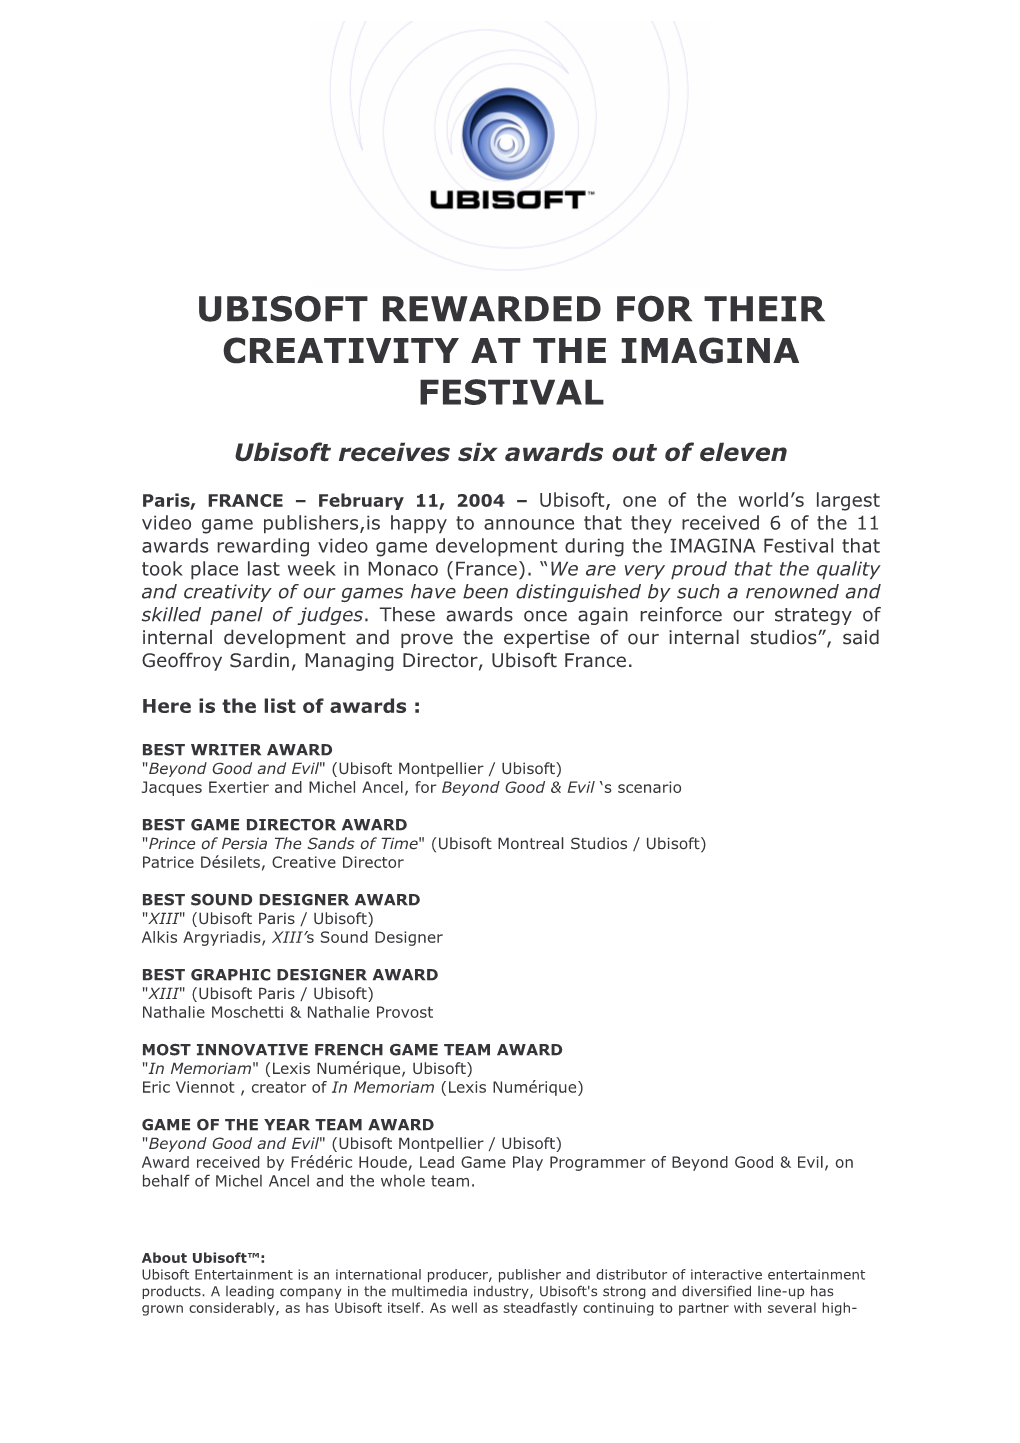 Ubisoft Rewarded for Their Creativity at the Imagina Festival